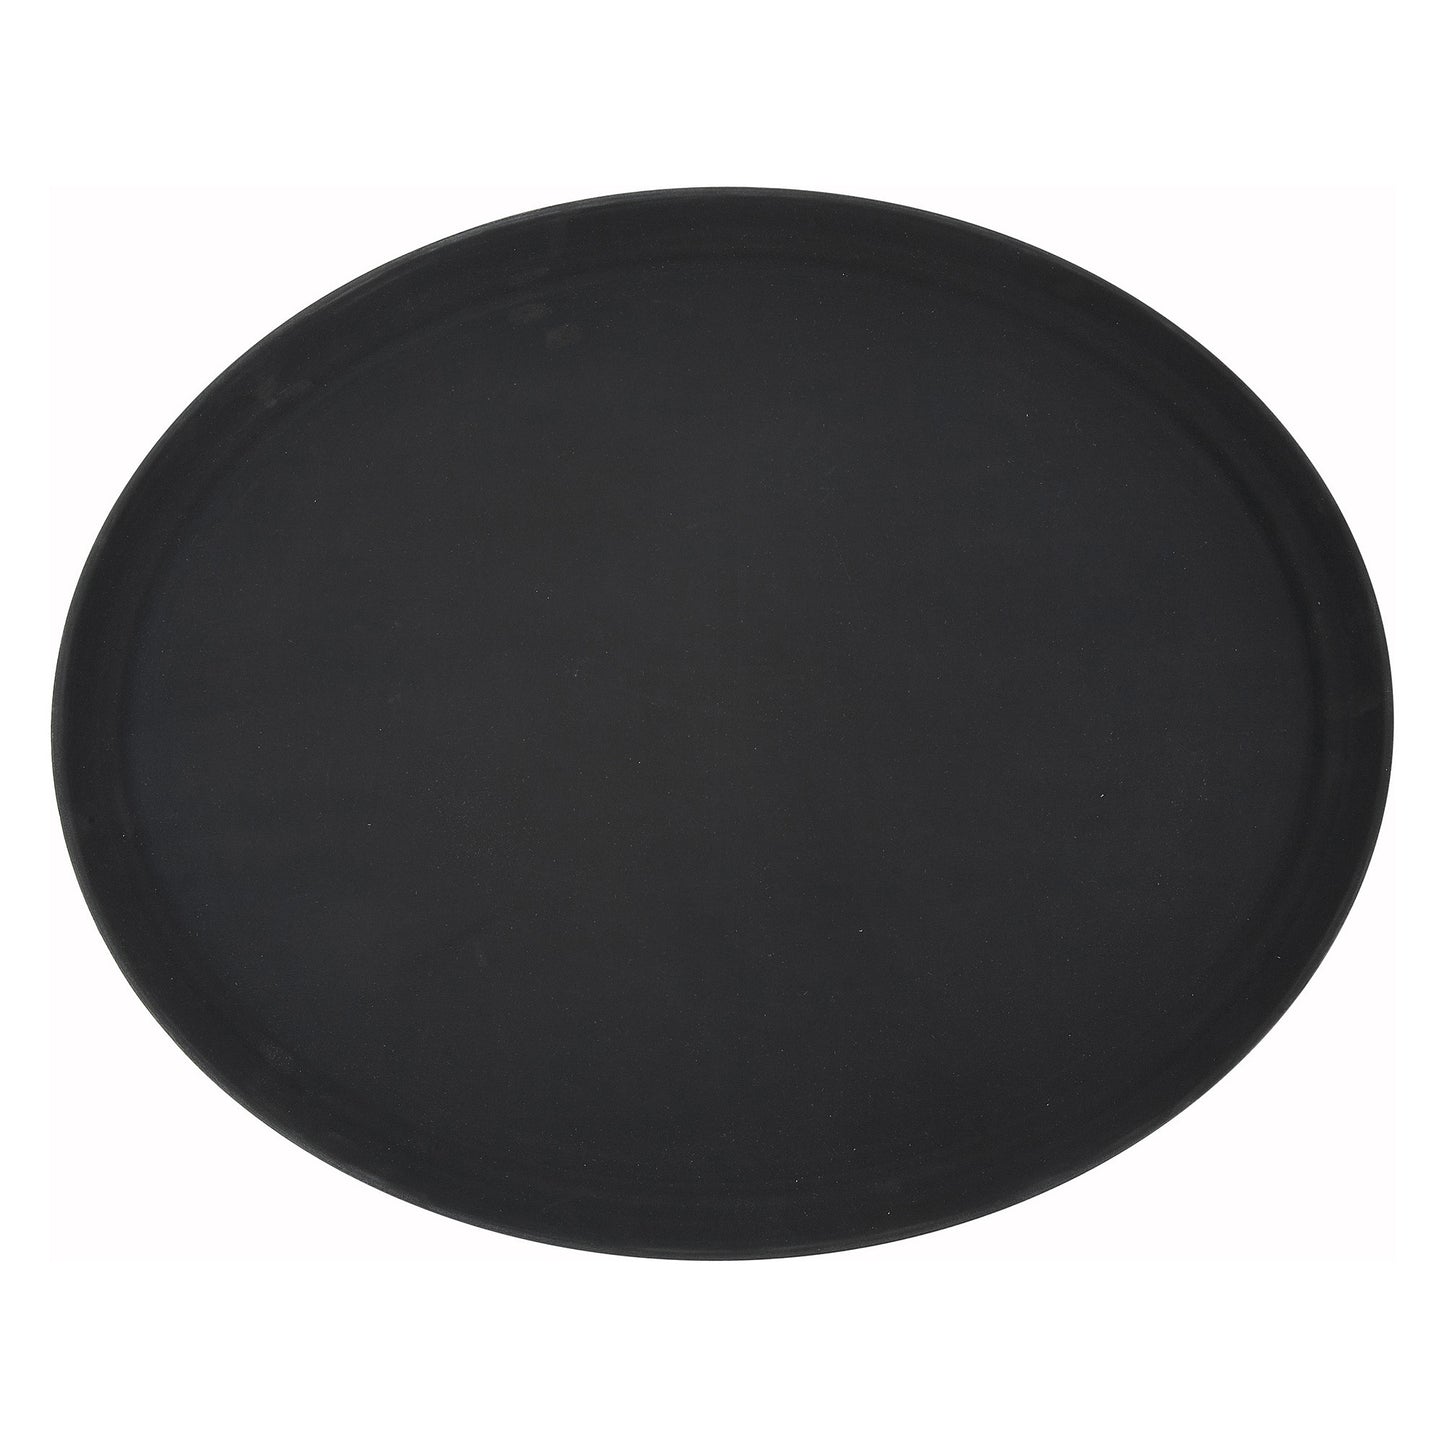 Easy-Hold 27" x 22" Oval Rubber-Lined Plastic Tray